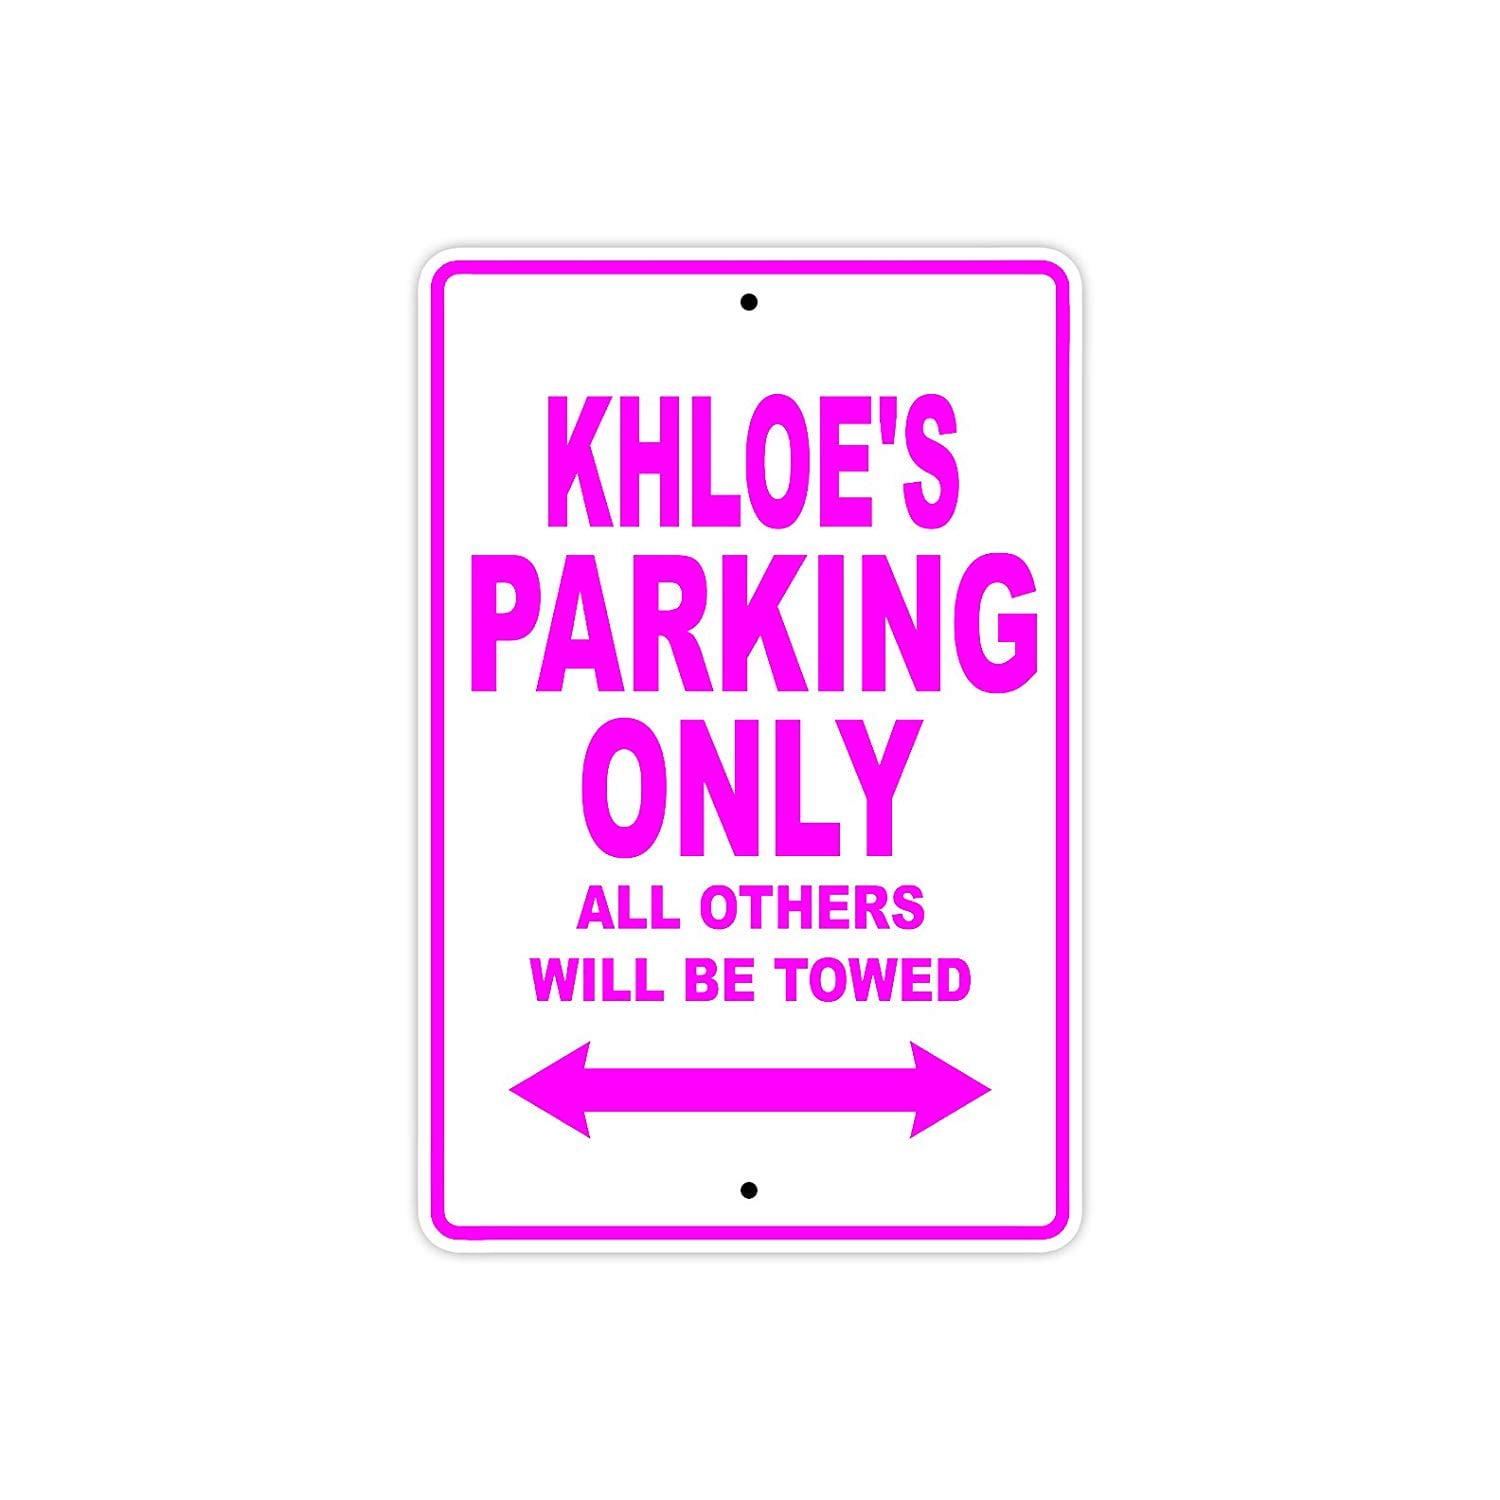 Susan's Parking Only All Others Will Be Towed Name Novelty Metal Aluminum Sign 